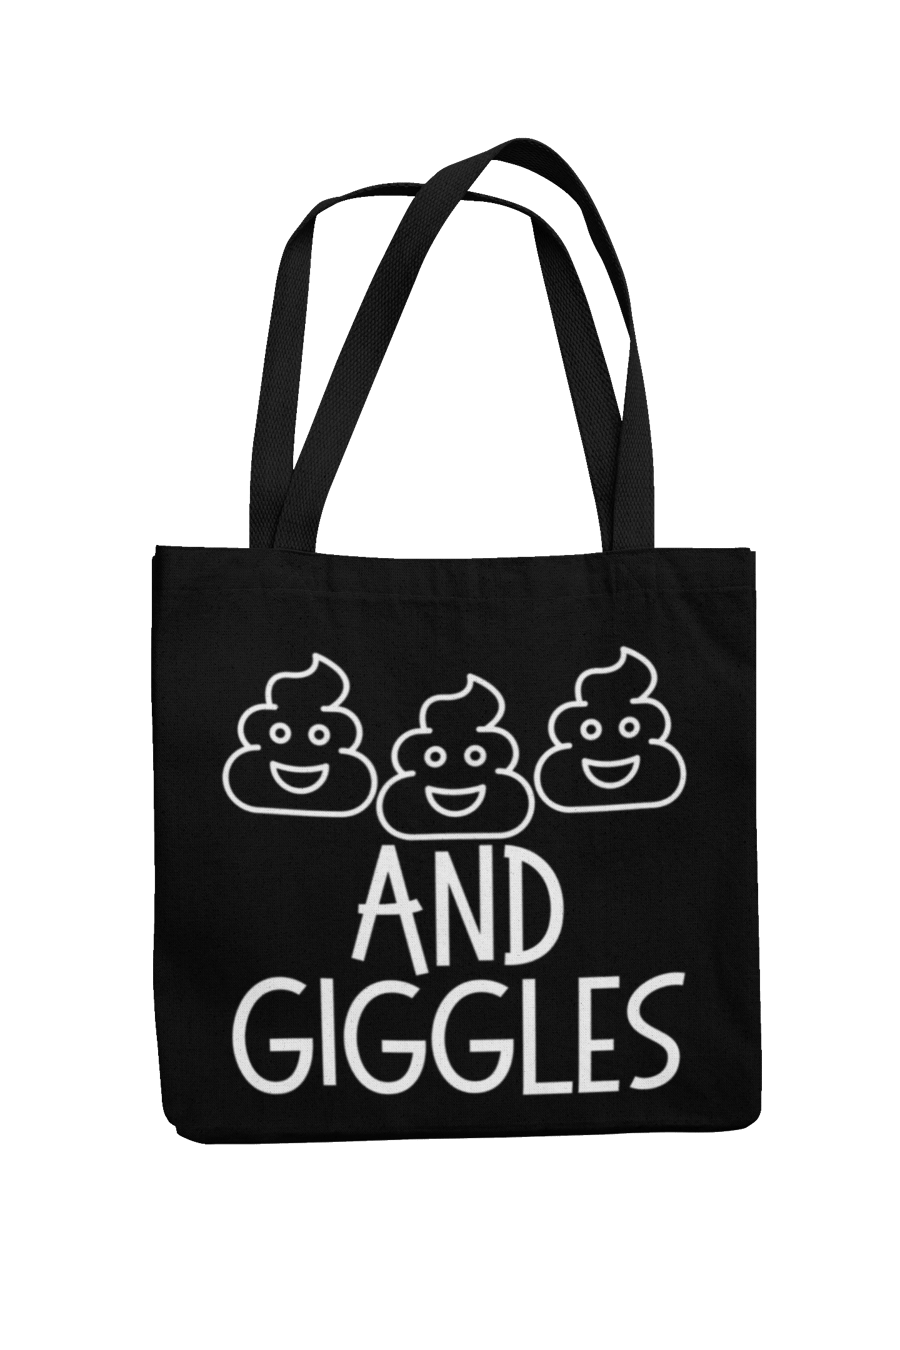 Sh.t's (poo's) and Giggles - Funny Novelty Tote Bag